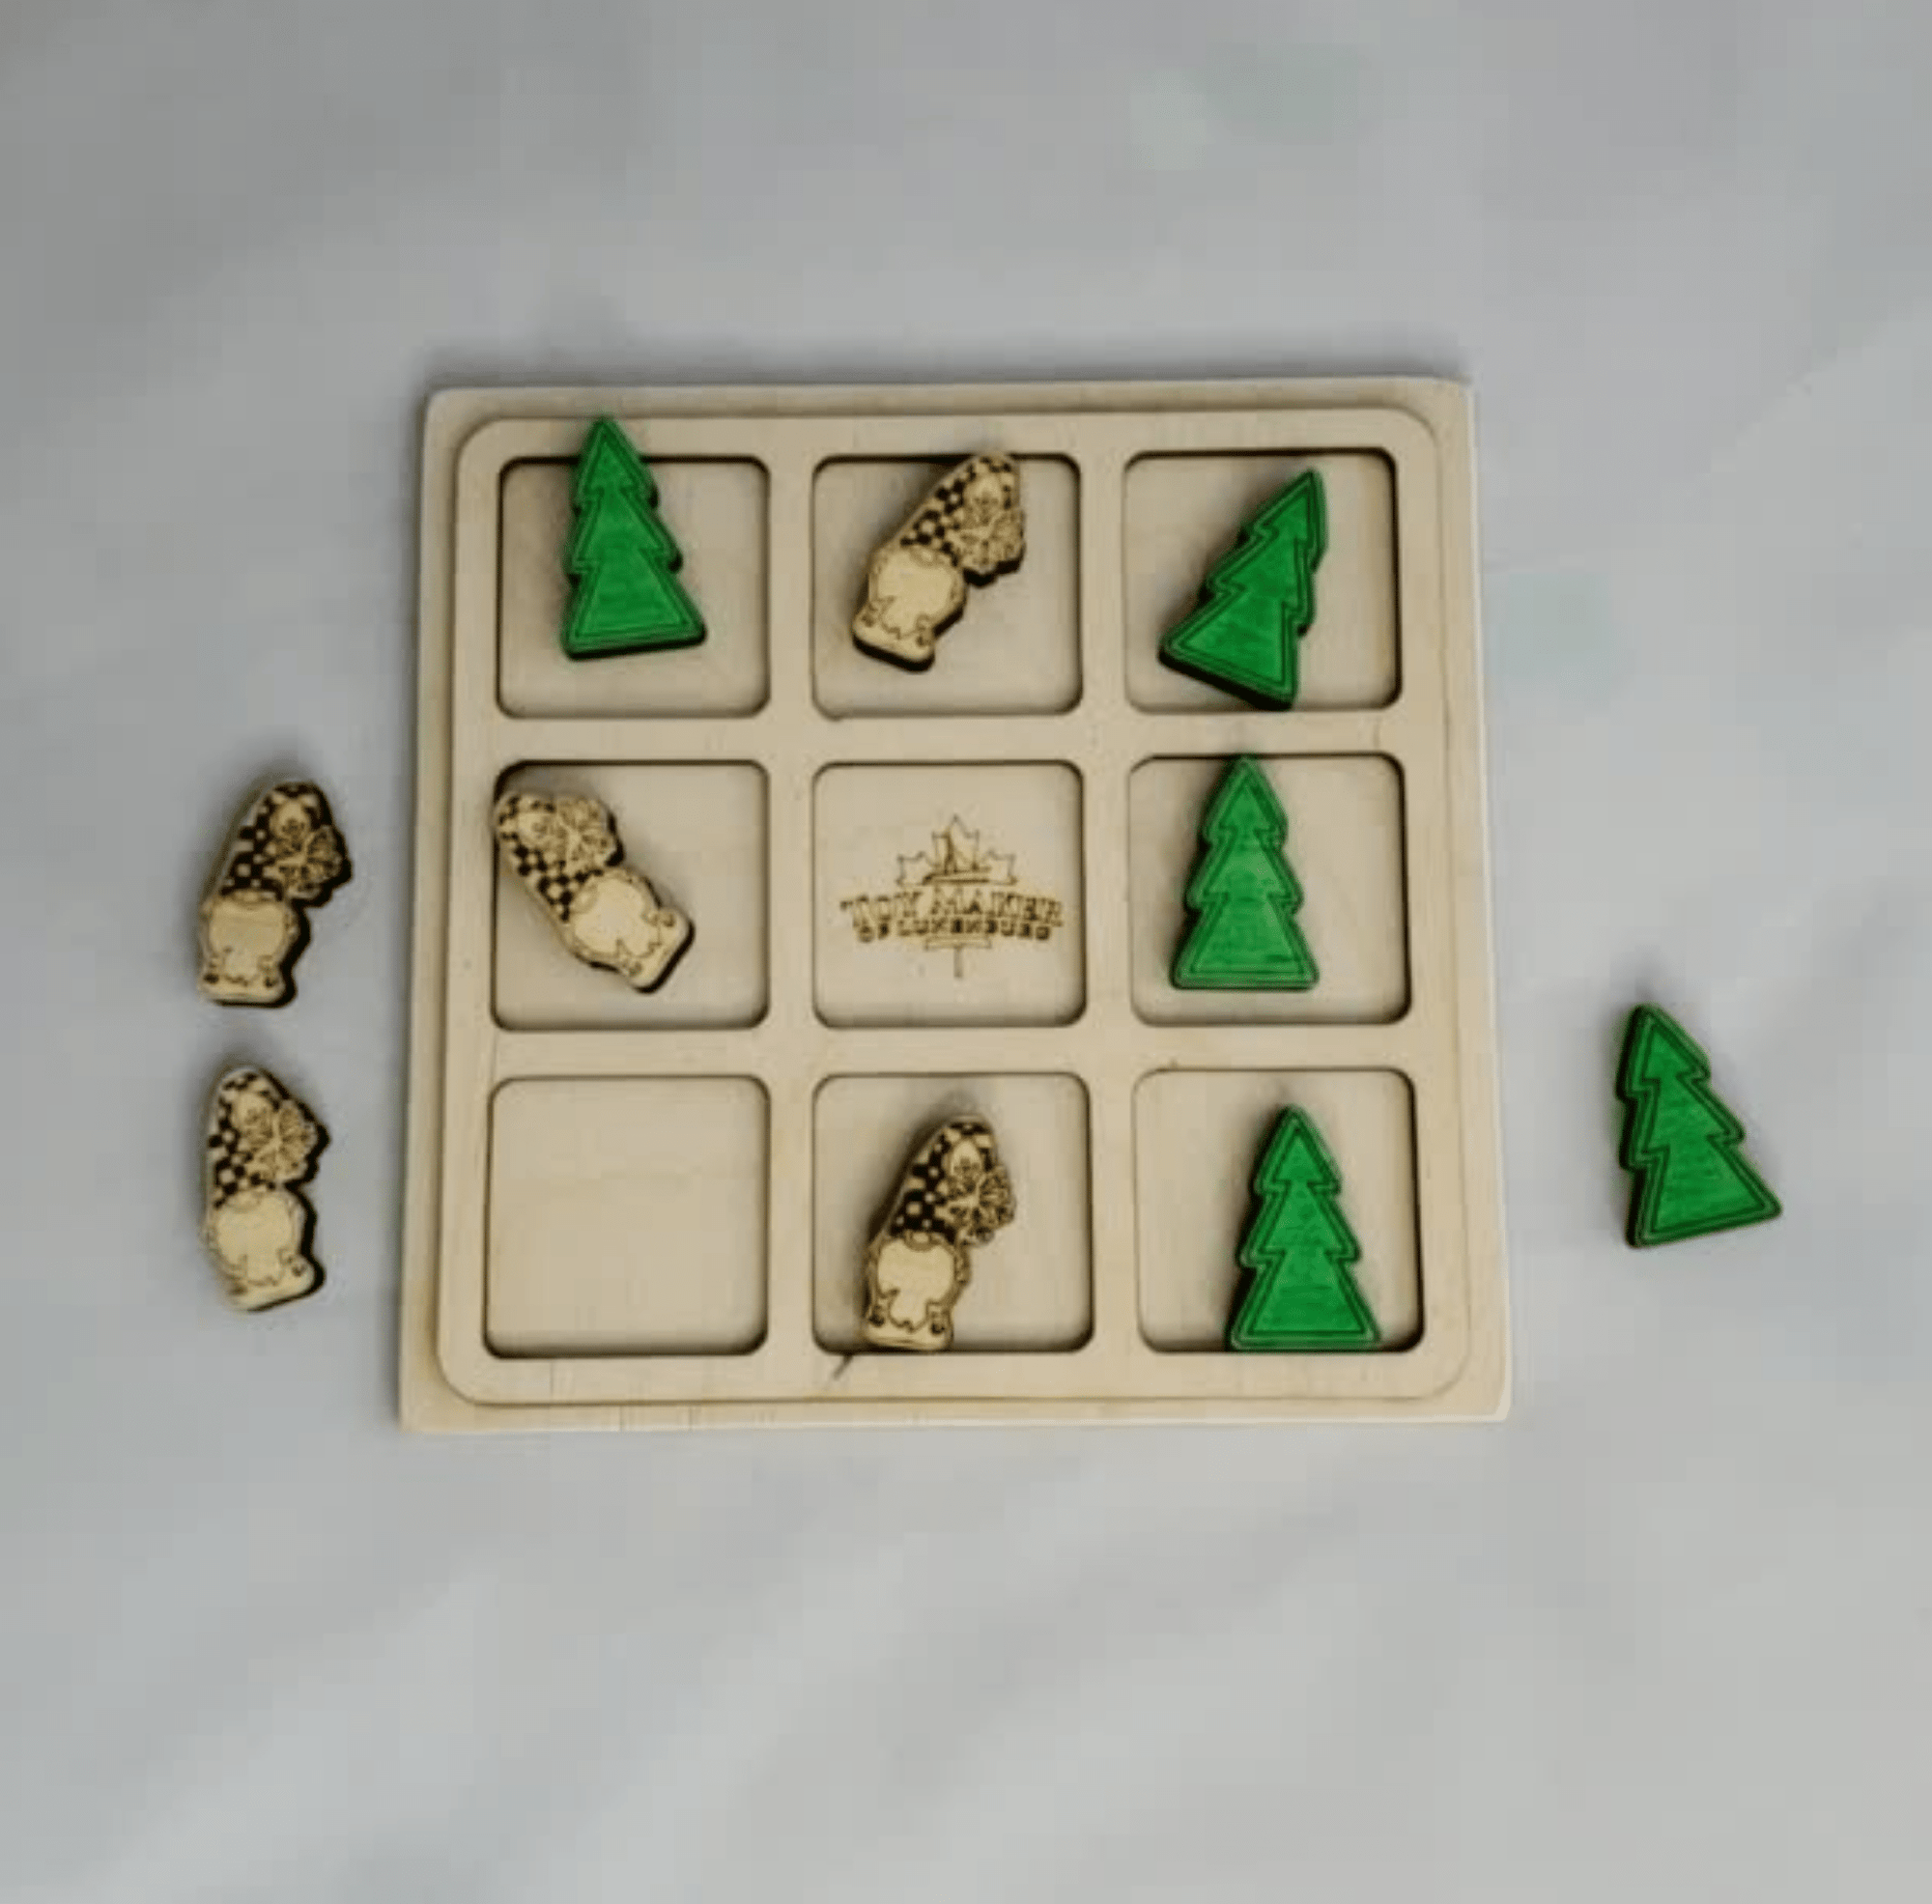 Toy Maker of Lunenburg Game Tree & Gnome Tic Tac Toe Game